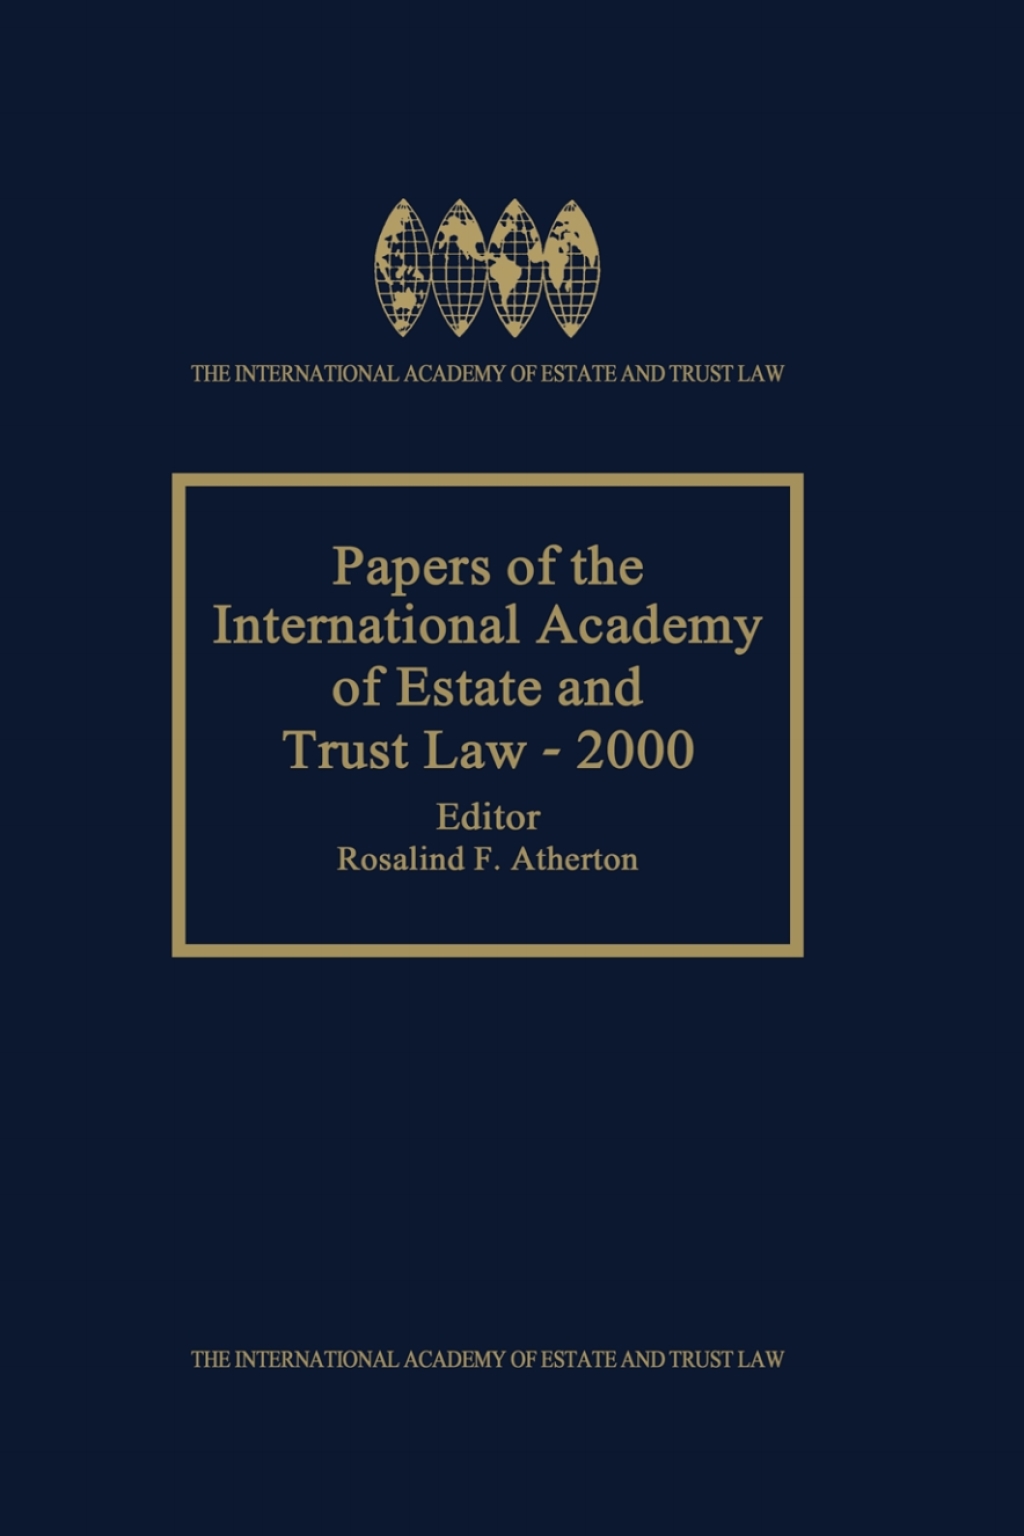 Papers of the International Academy of Estate and Trust Law - 2000 (eBook Rental)